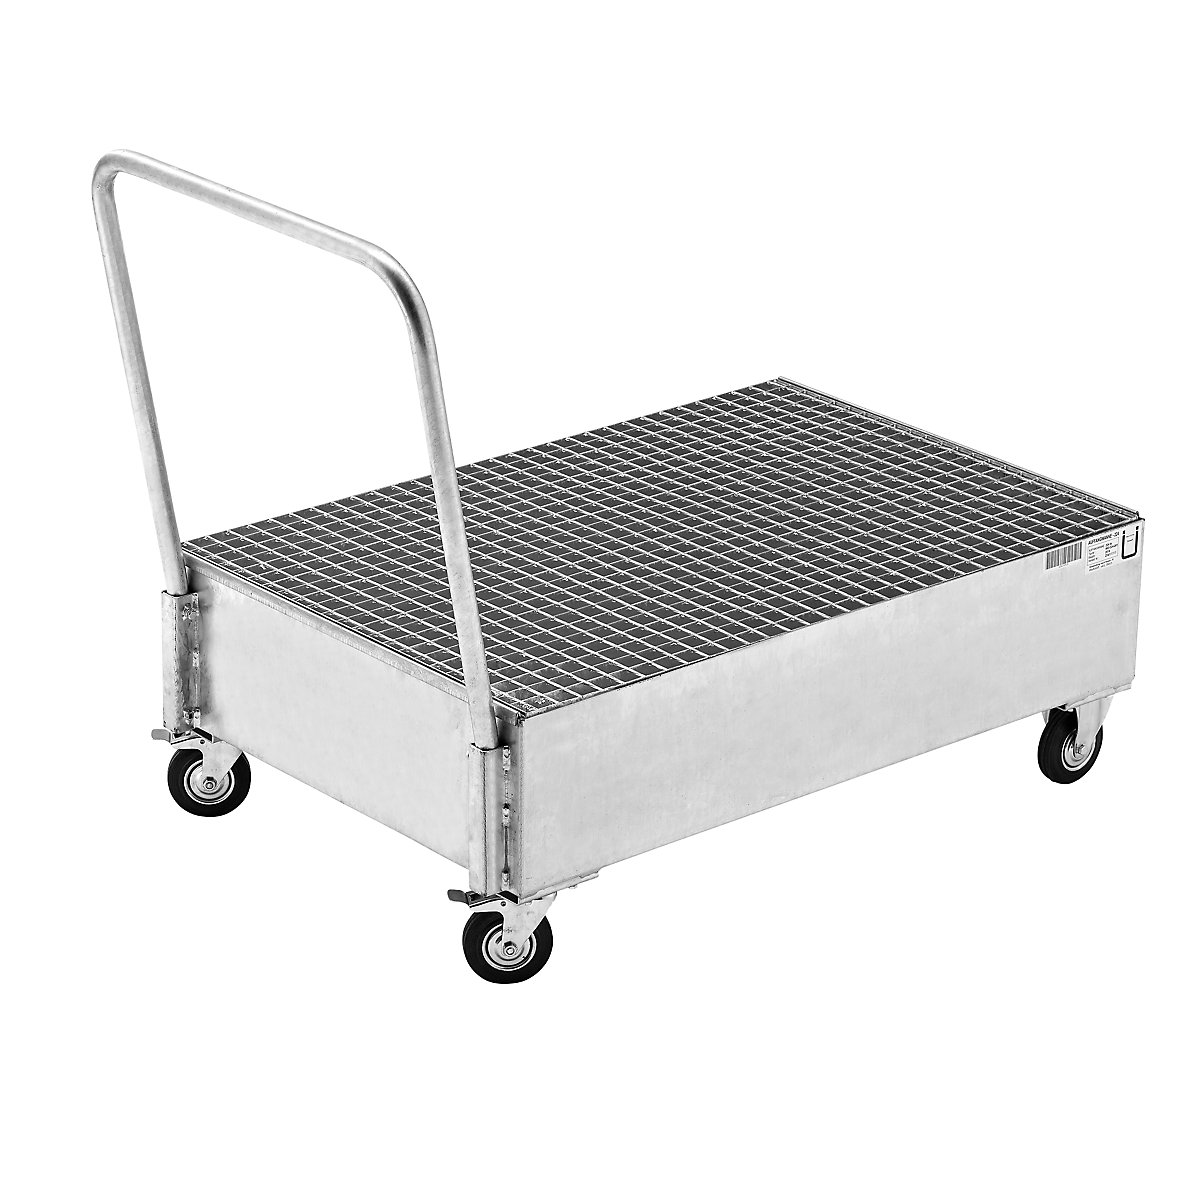 Mobile sump tray made of sheet steel – eurokraft basic, LxW 1200 x 800 mm, 2 x 200 l vertical drums, hot dip galvanised-5